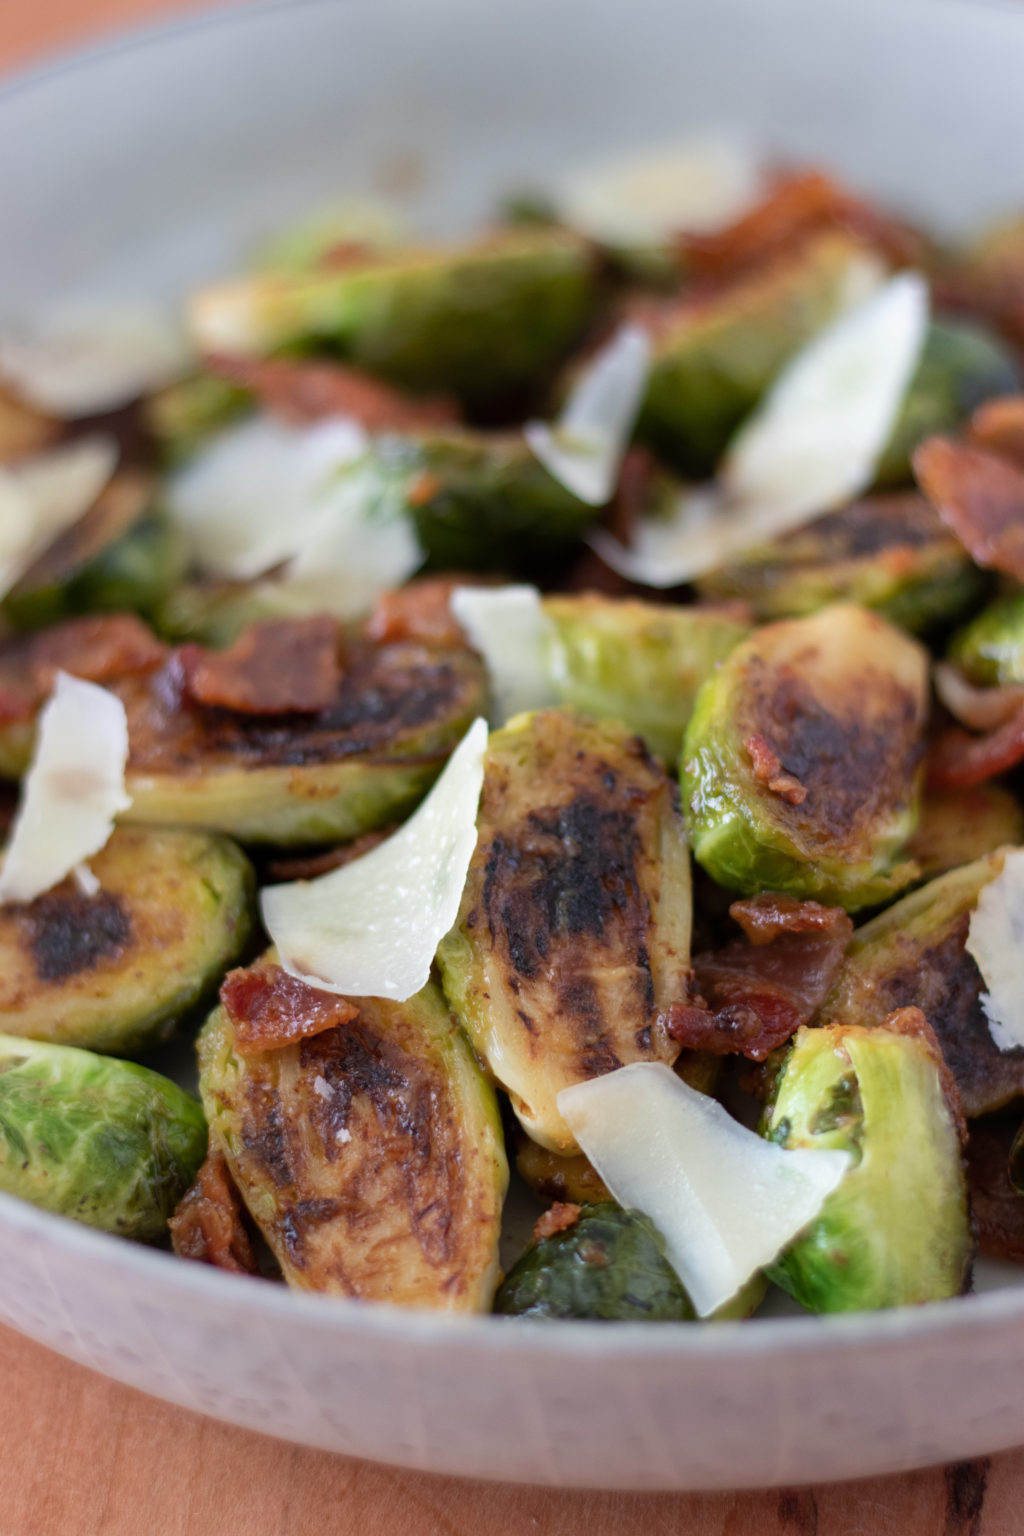 Caramelized Brussels Sprouts with Bacon - The Grove Bend Kitchen